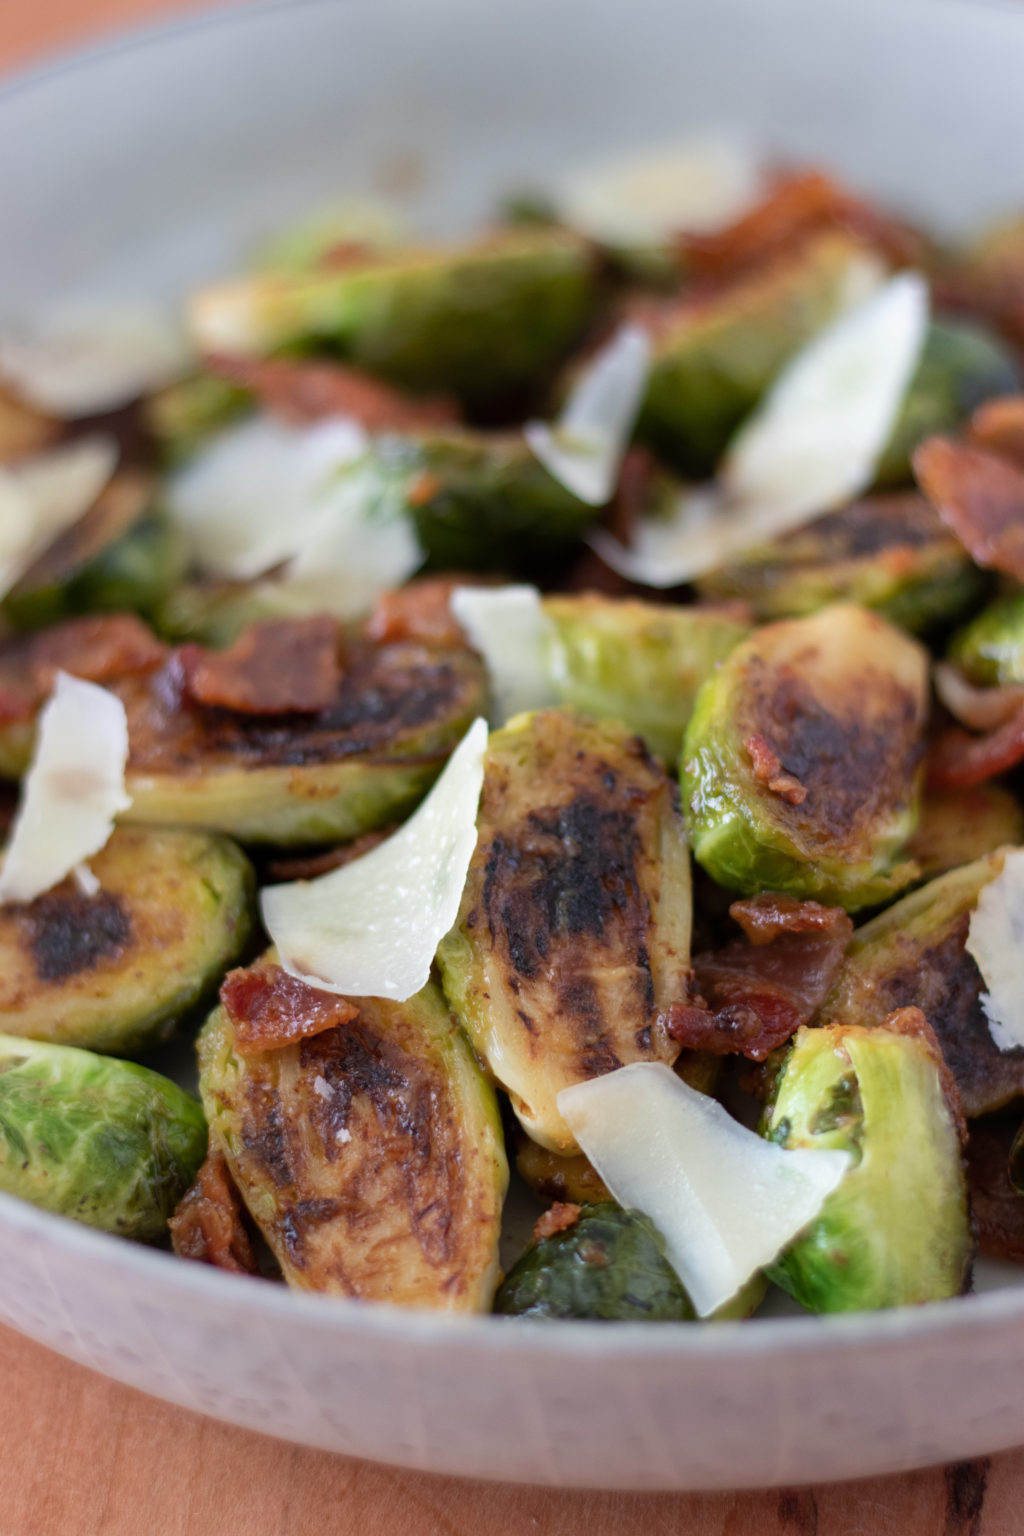 Caramelized Brussels Sprouts with Bacon - The Grove Bend Kitchen